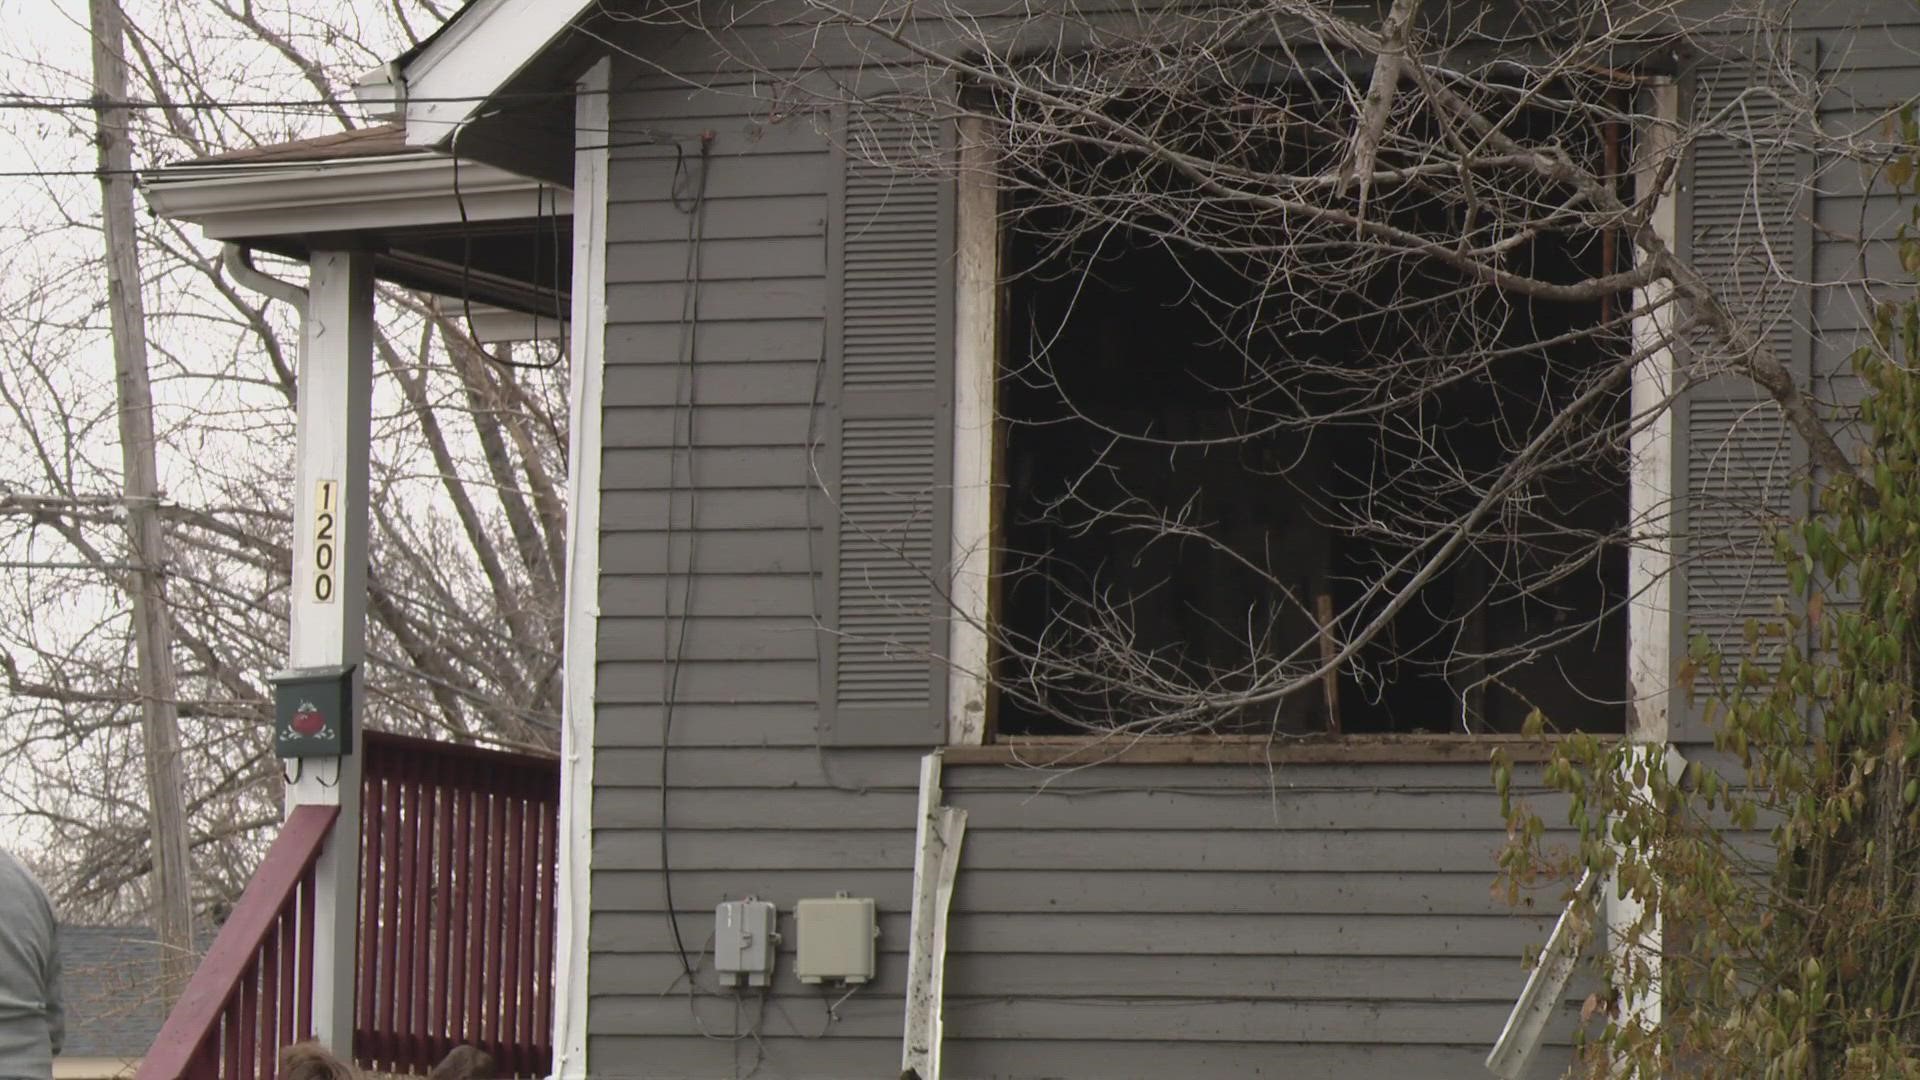 An investigation is underway after a man and woman died in a house fire in Lemay. Firefighters were called just before 10 a.m. to the 1200 block of Wachtel Avenue.